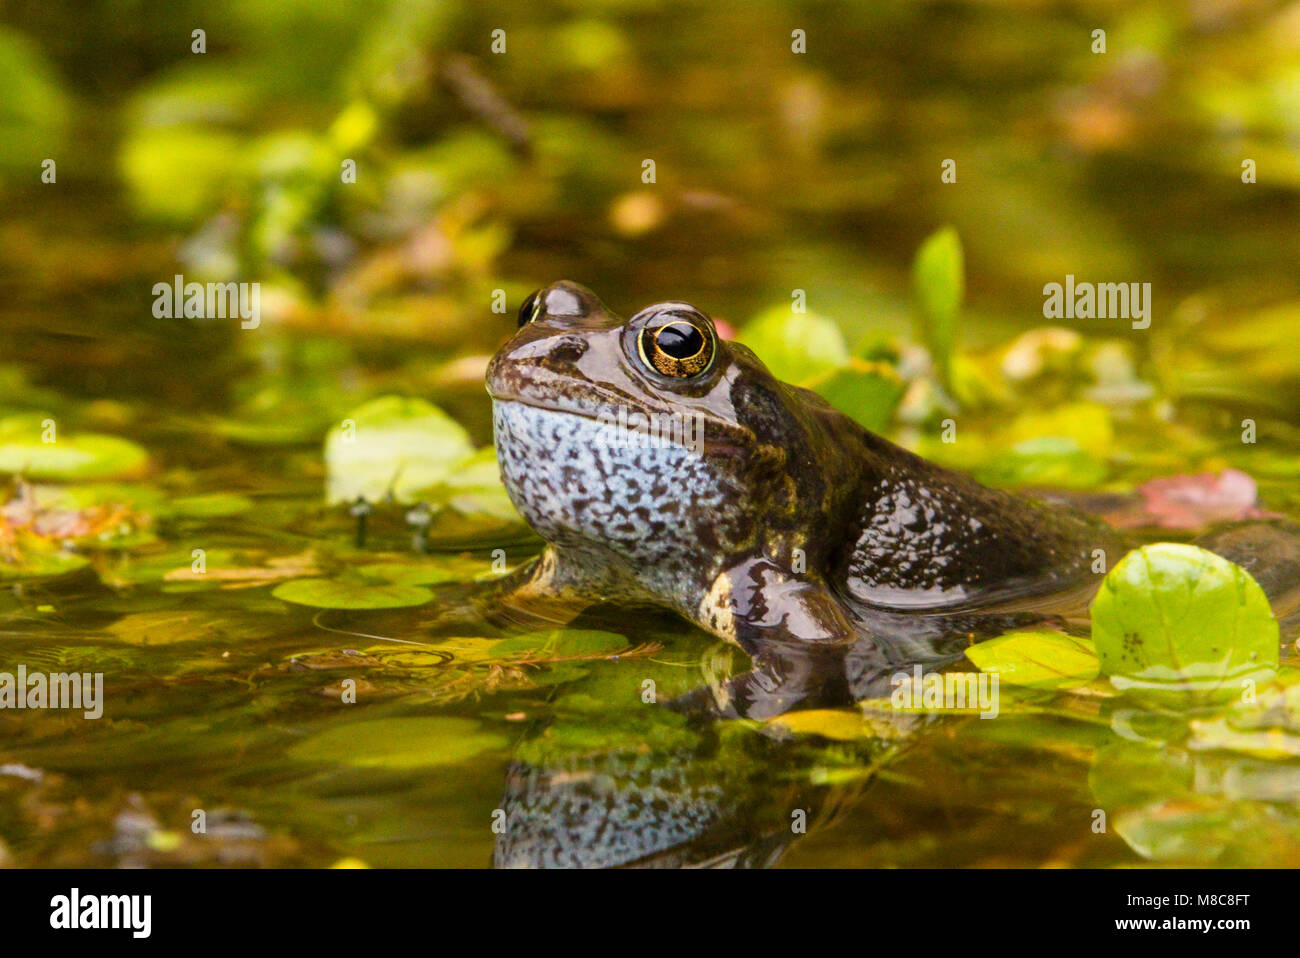 Frogs and nature in spring Stock Photo